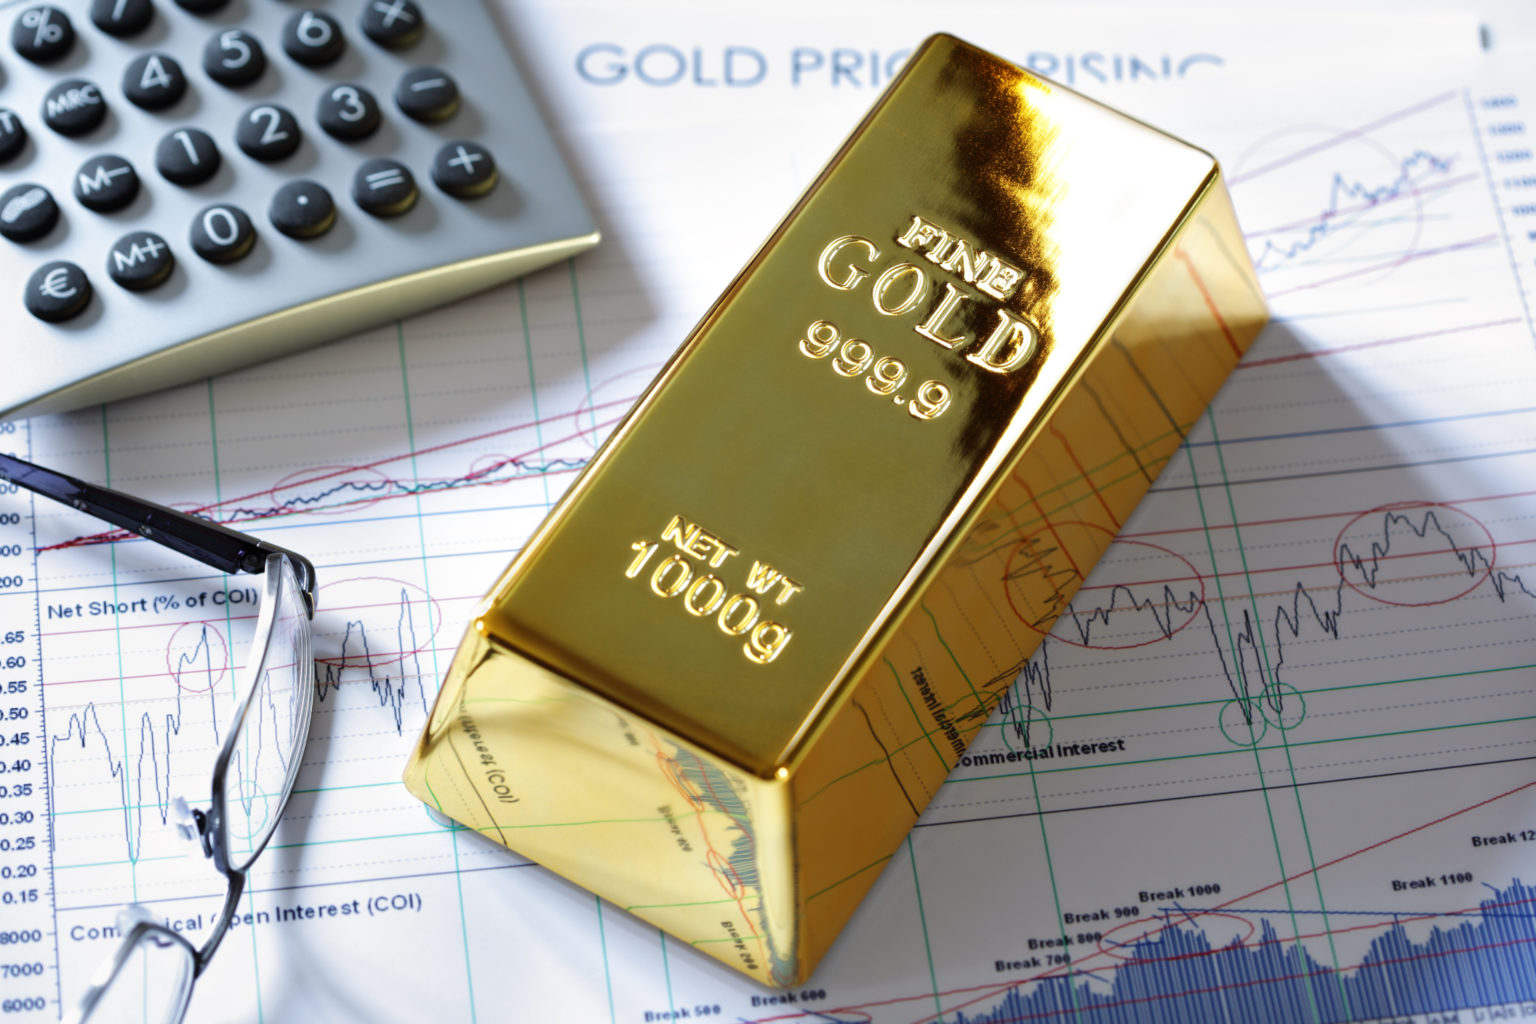 IS IT BETTER TO BUY GOLD BULLION OR GOLD STOCKS?